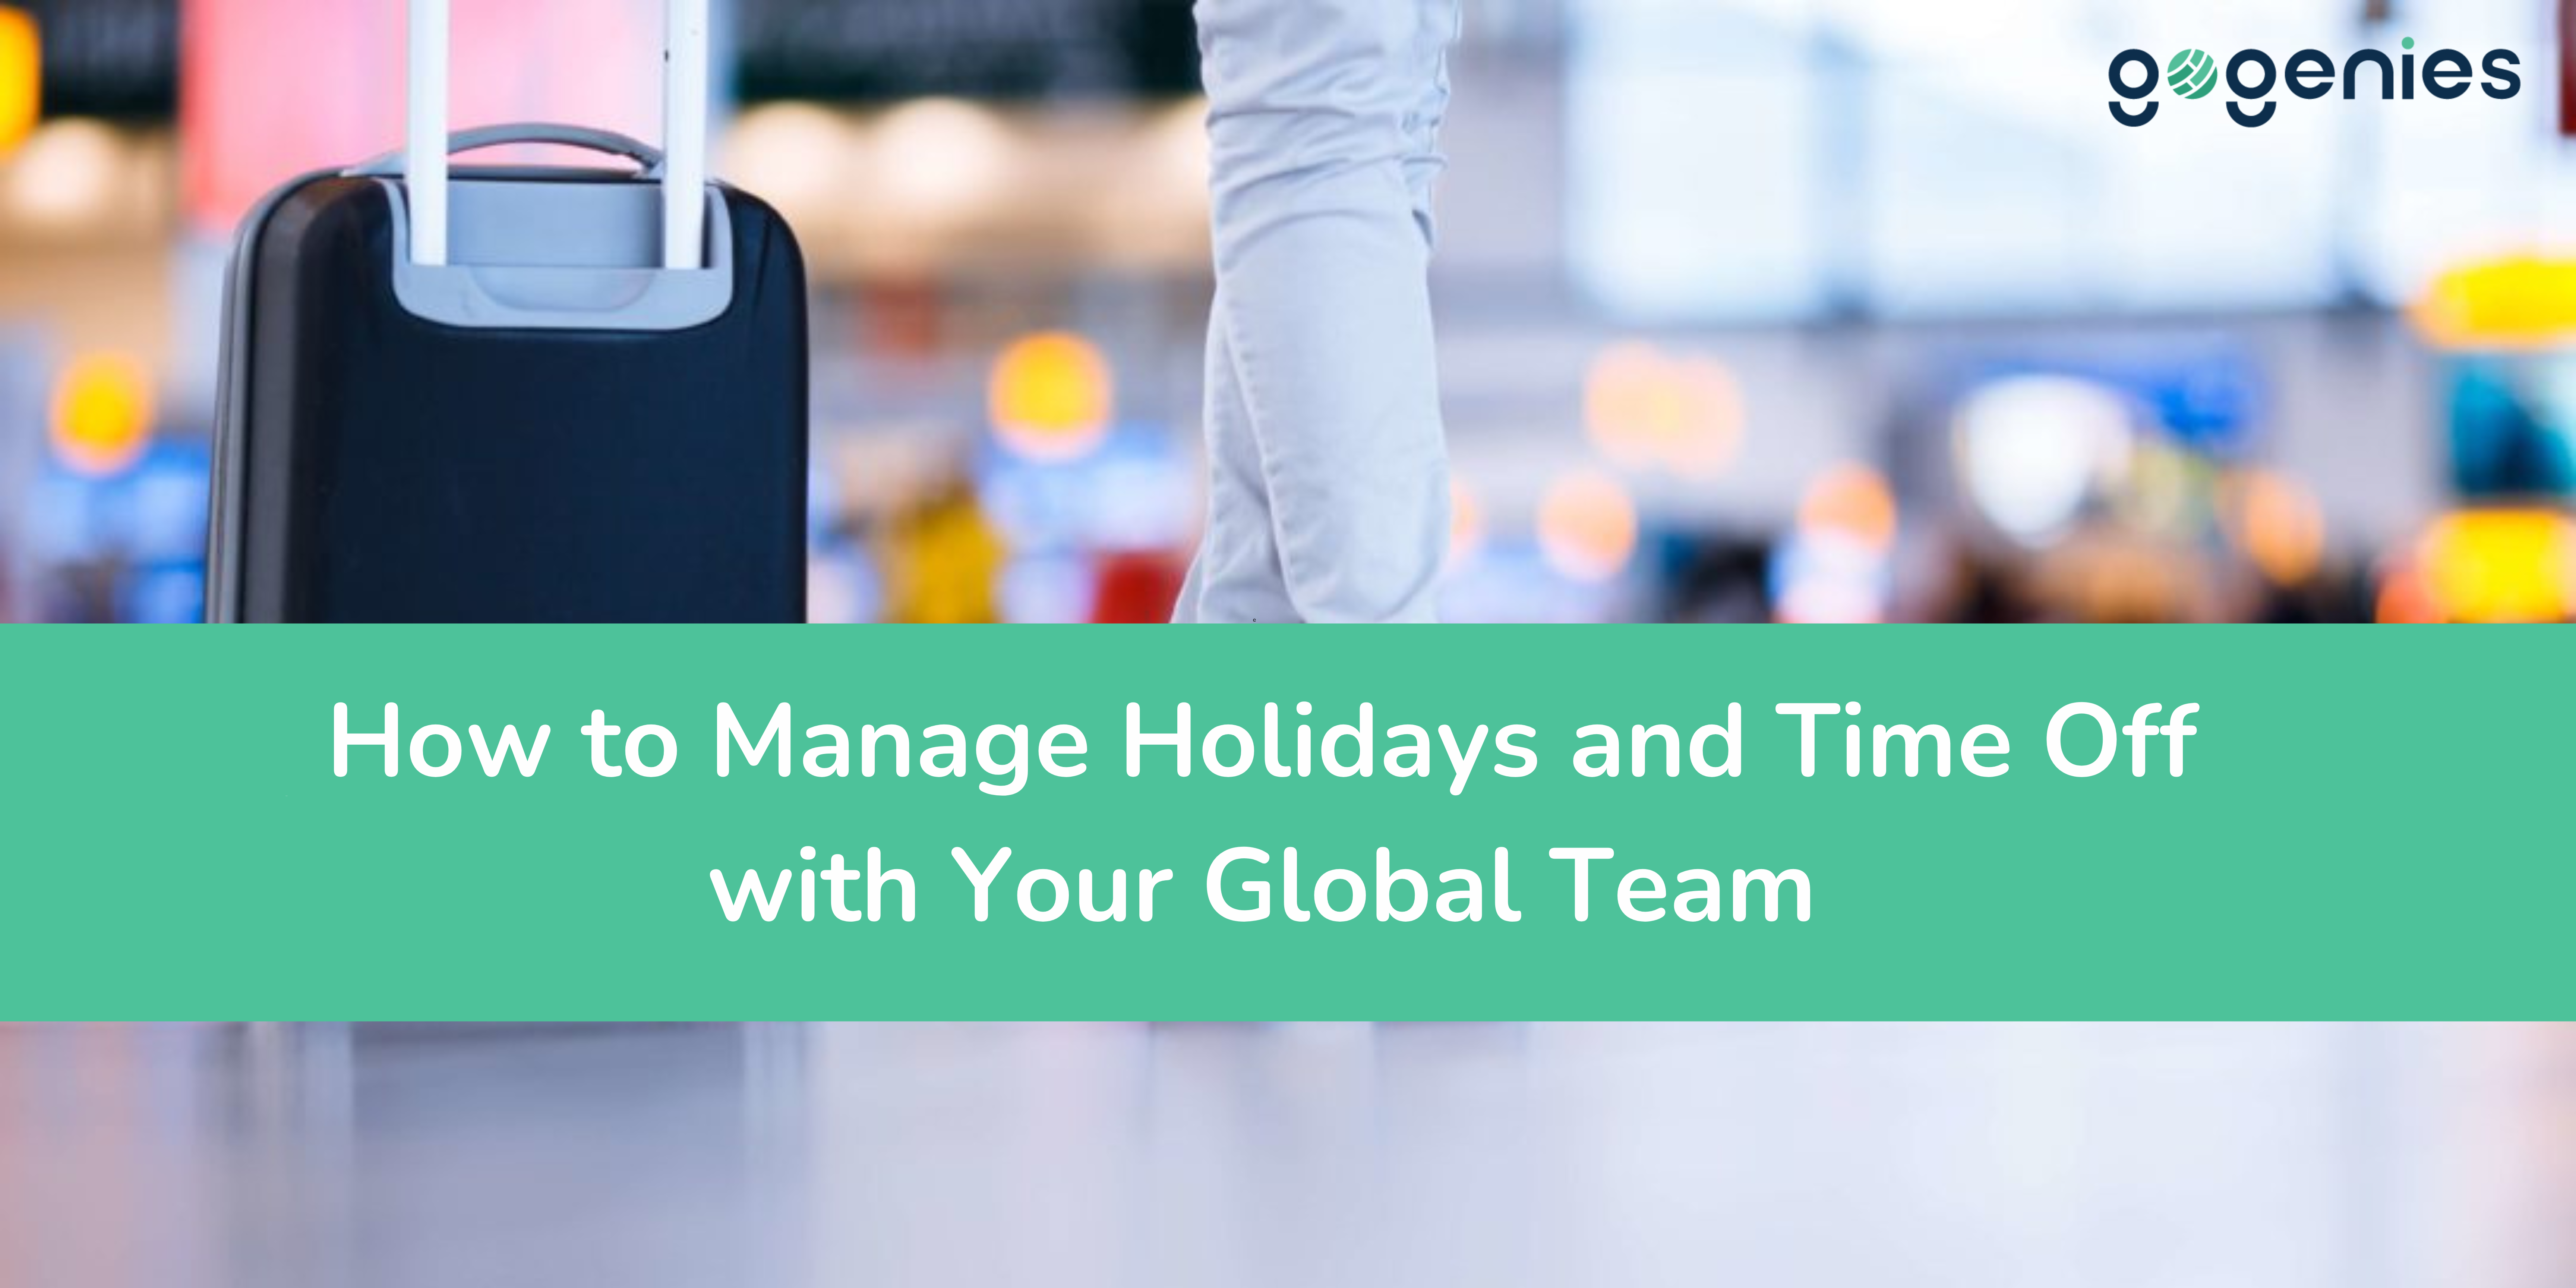 How to Manage Holidays and Time Off with Your Global Team